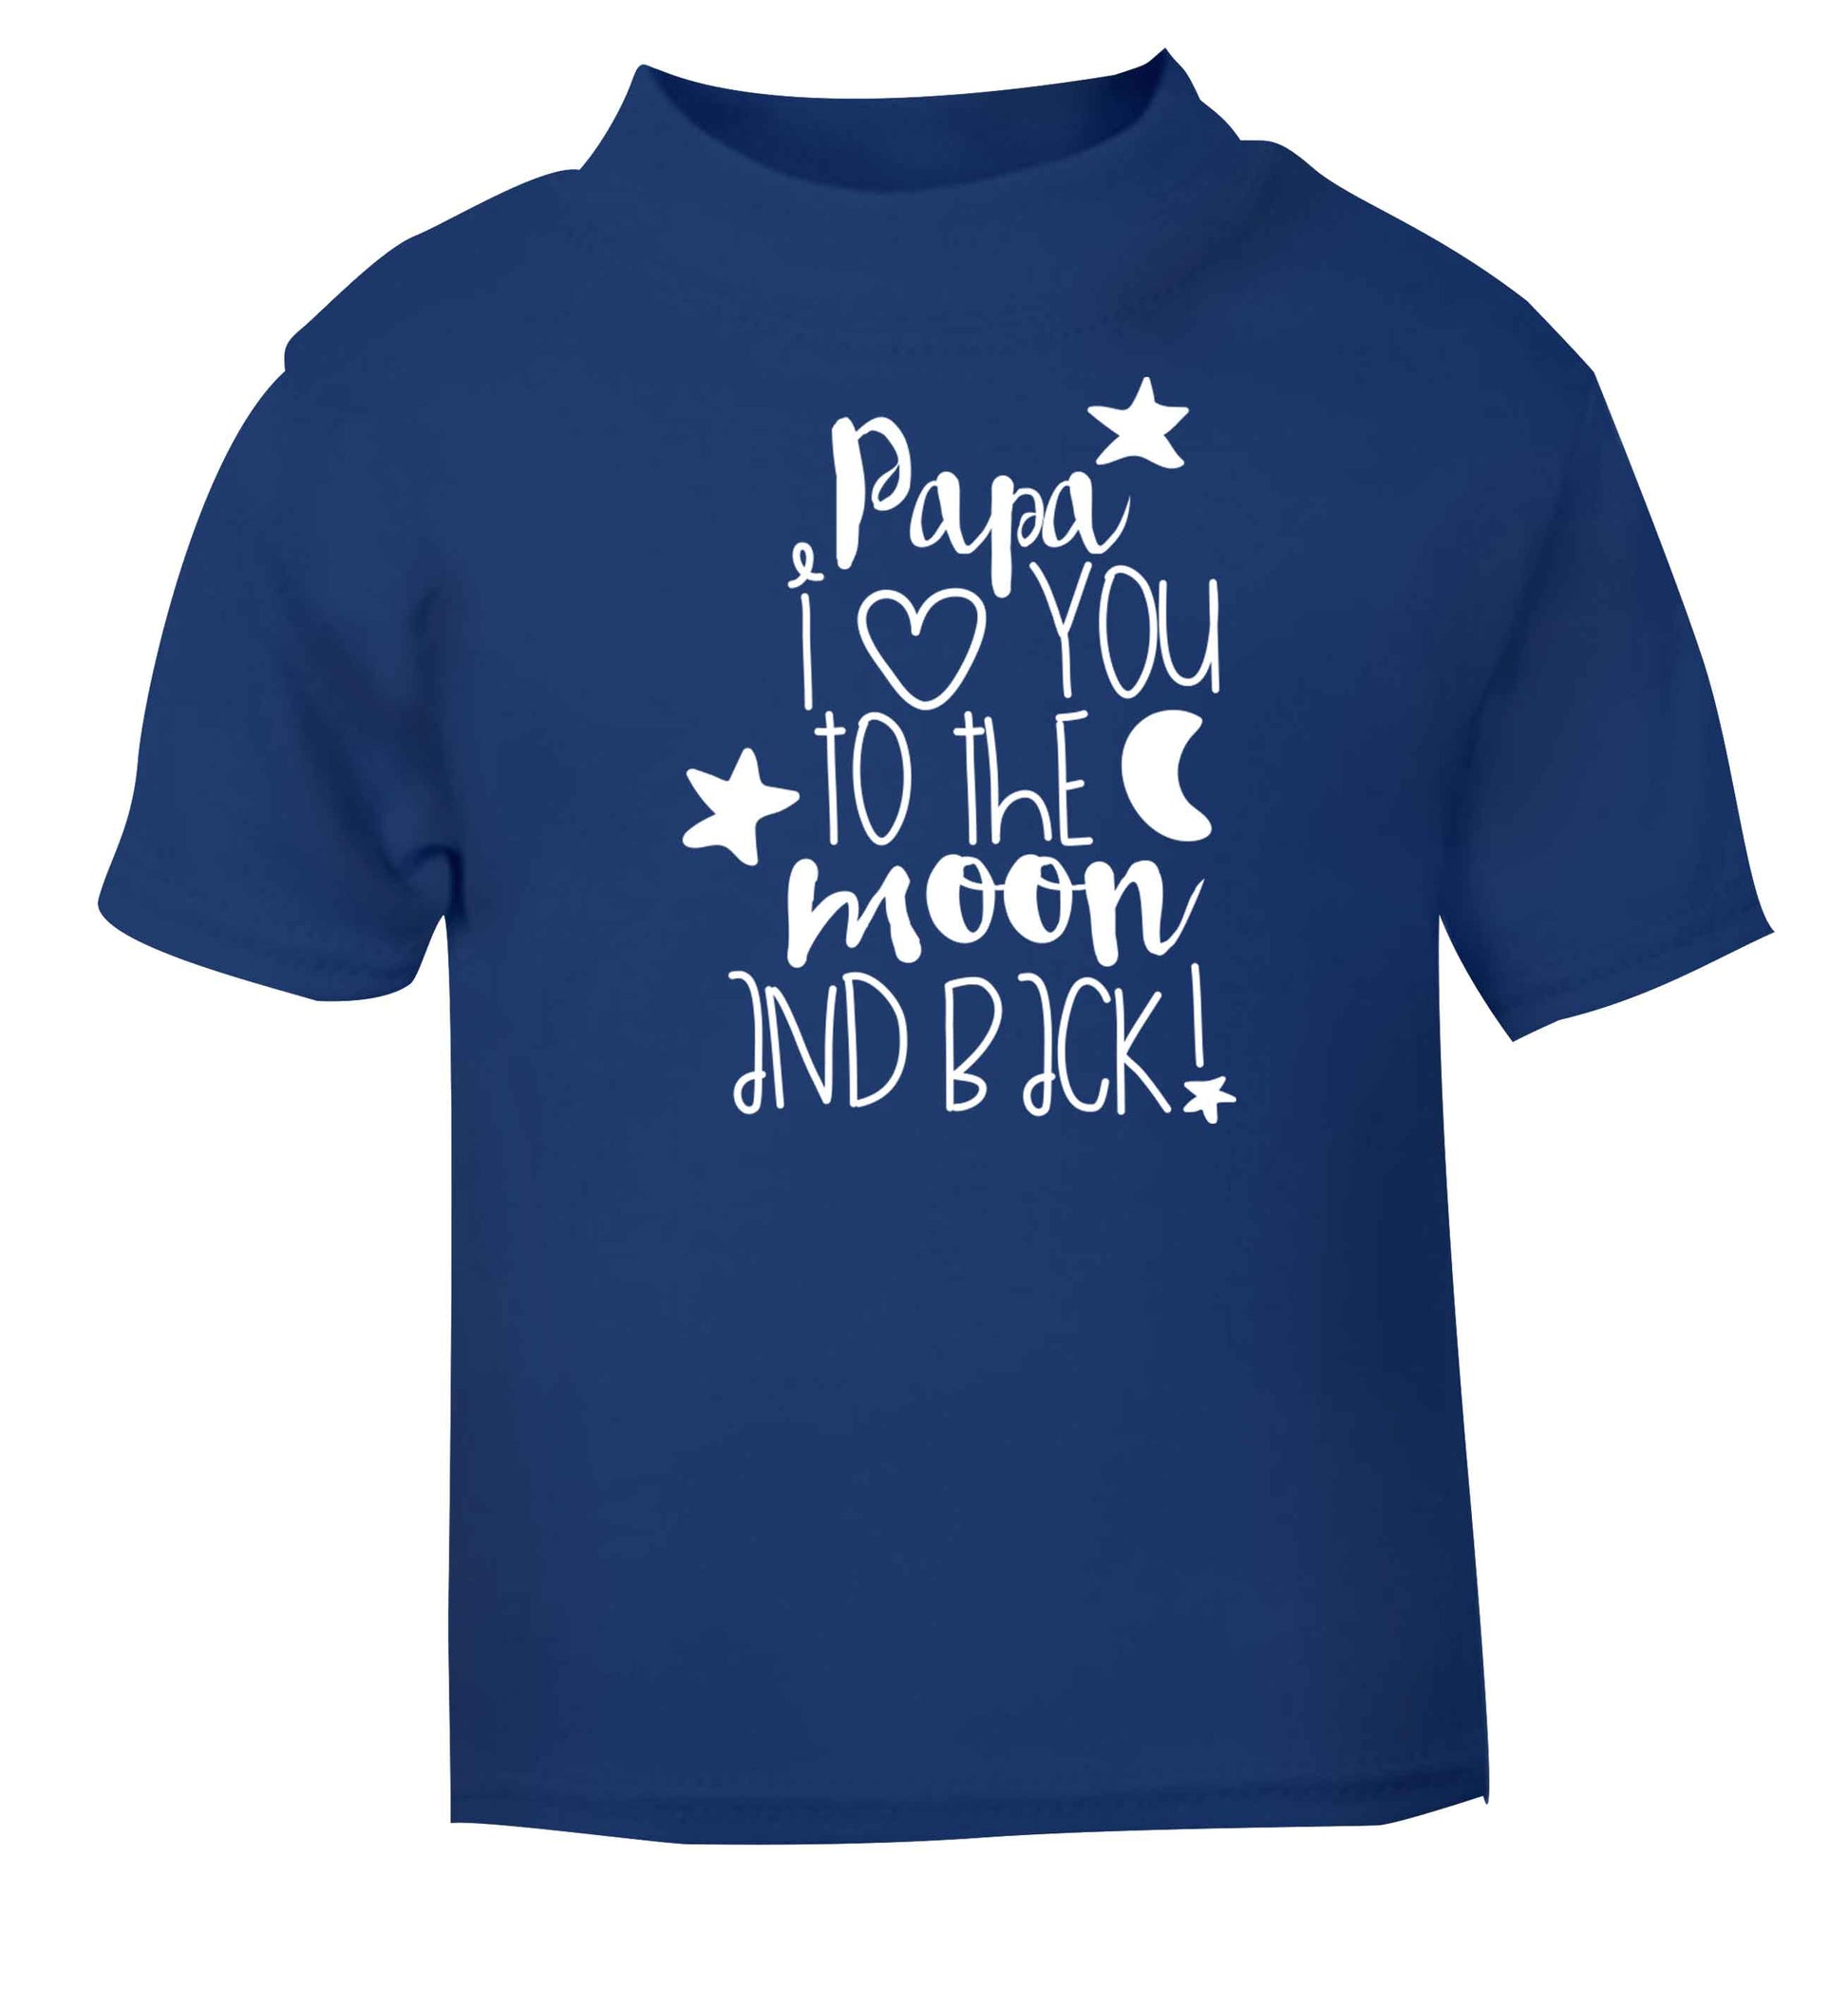 Papa I love you to the moon and back blue baby toddler Tshirt 2 Years